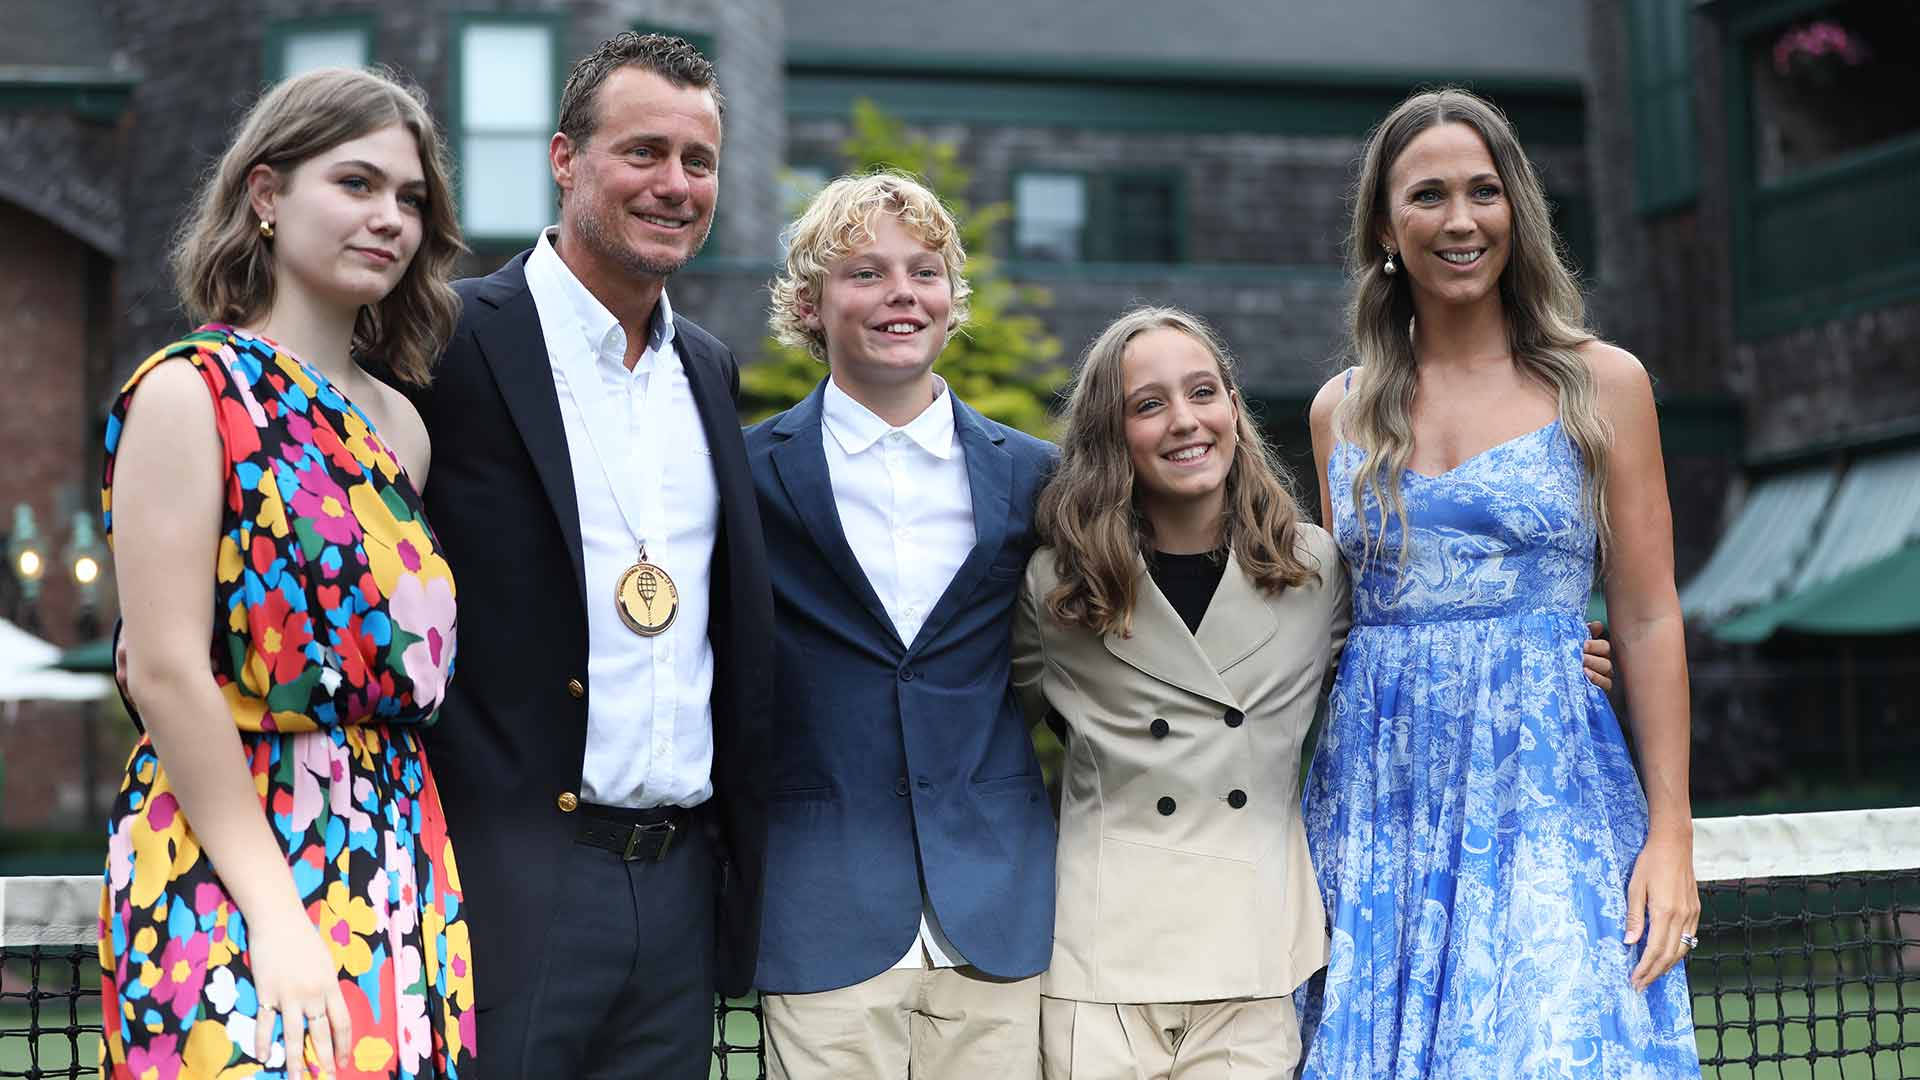 Lleyton Hewitt at the Tennis Hall of Fame Induction Ceremony 2022 Wallpaper